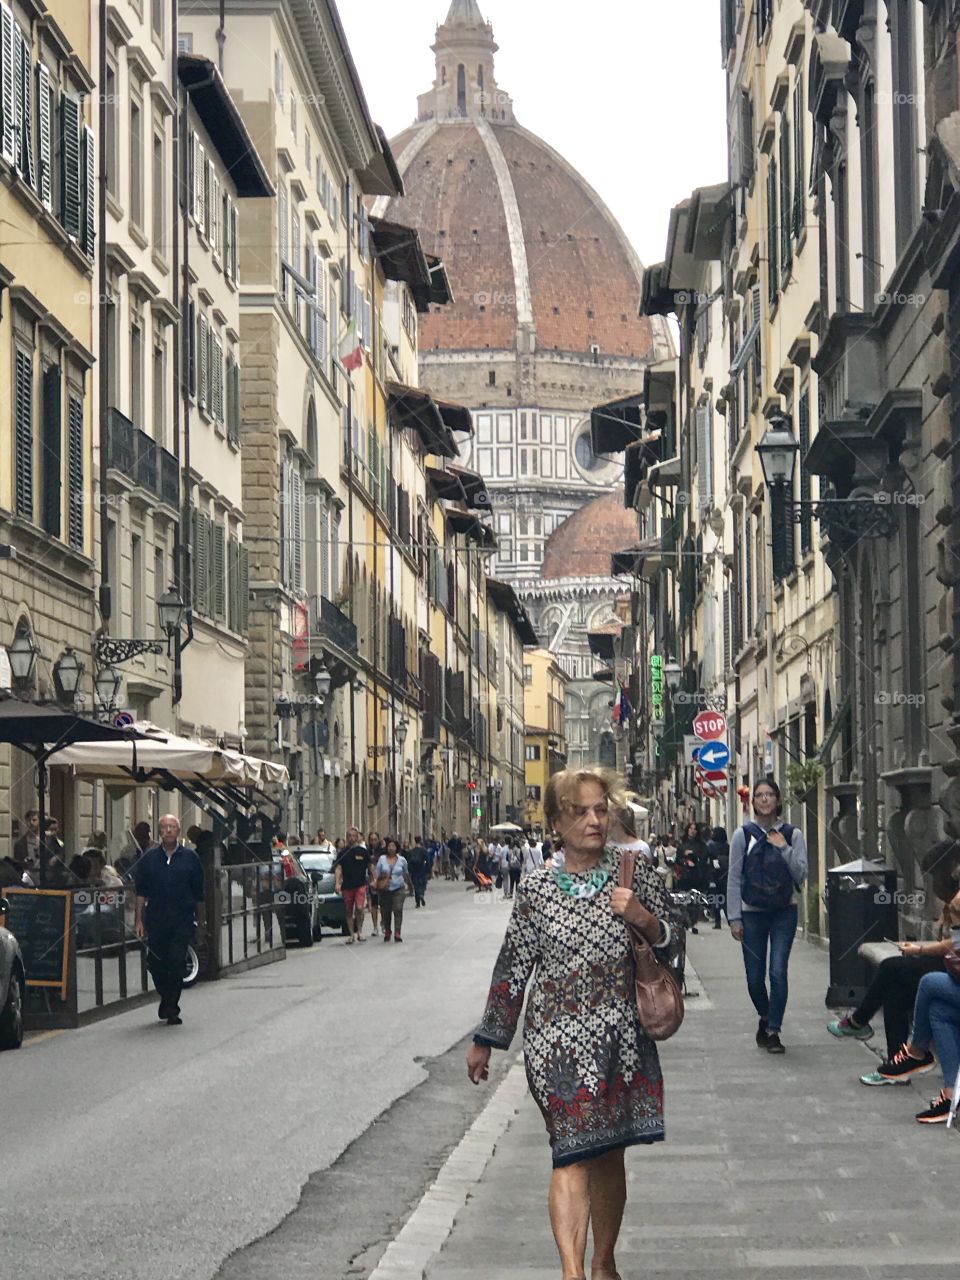 I snapped this Lady in the mid morning, Florence locals shop in style!